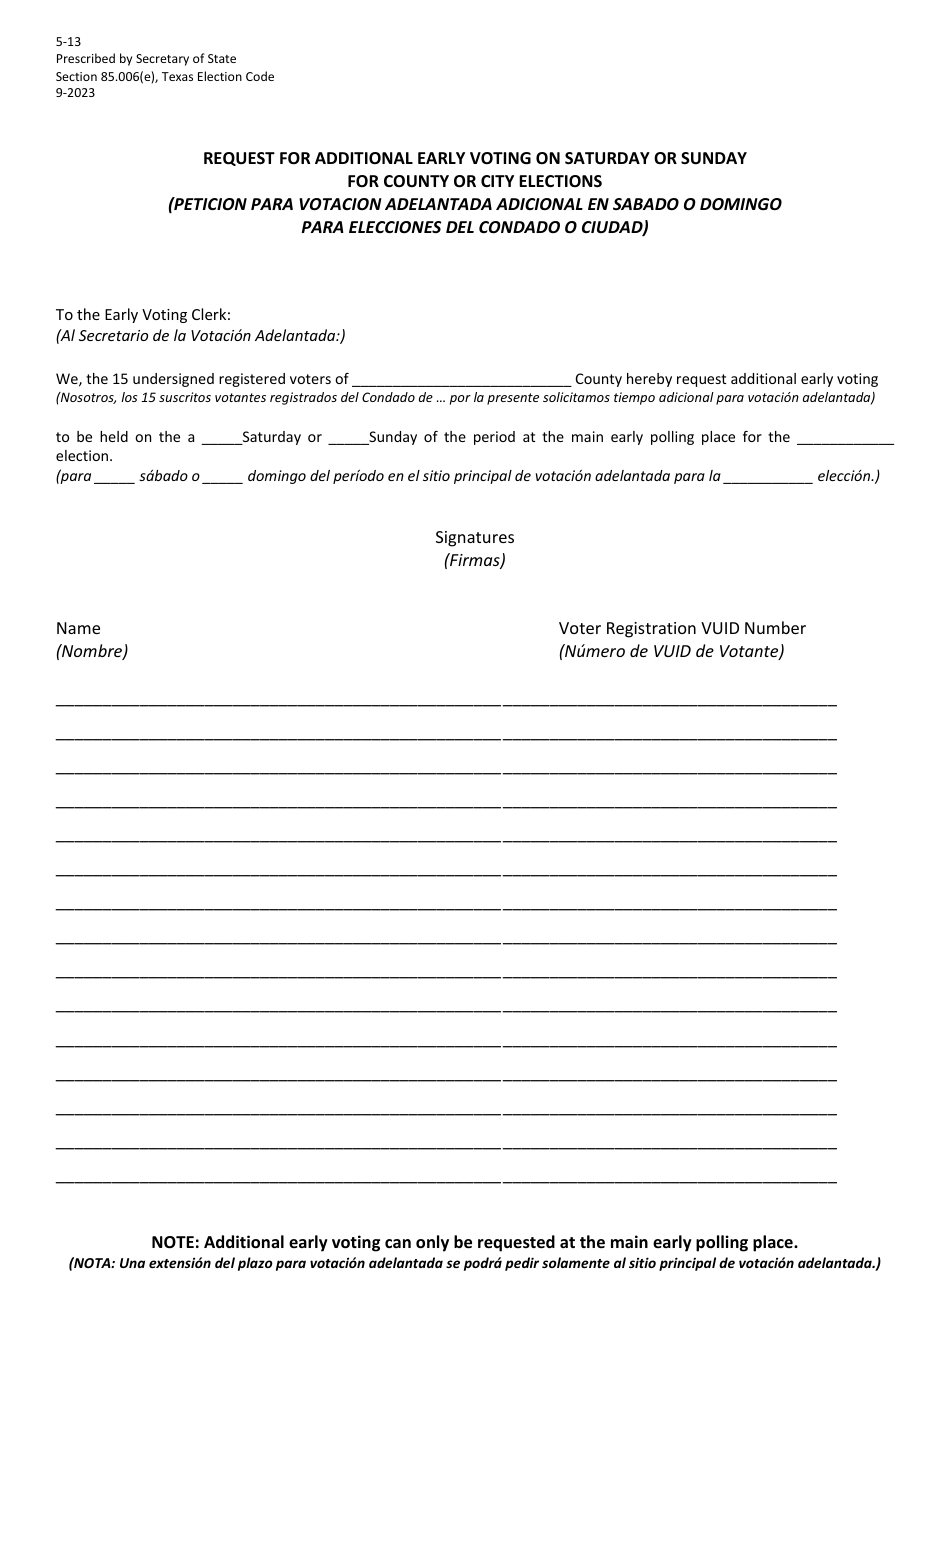 Form 5-13 Request for Additional Early Voting on Saturday or Sunday for County or City Elections - Texas (English / Spanish), Page 1